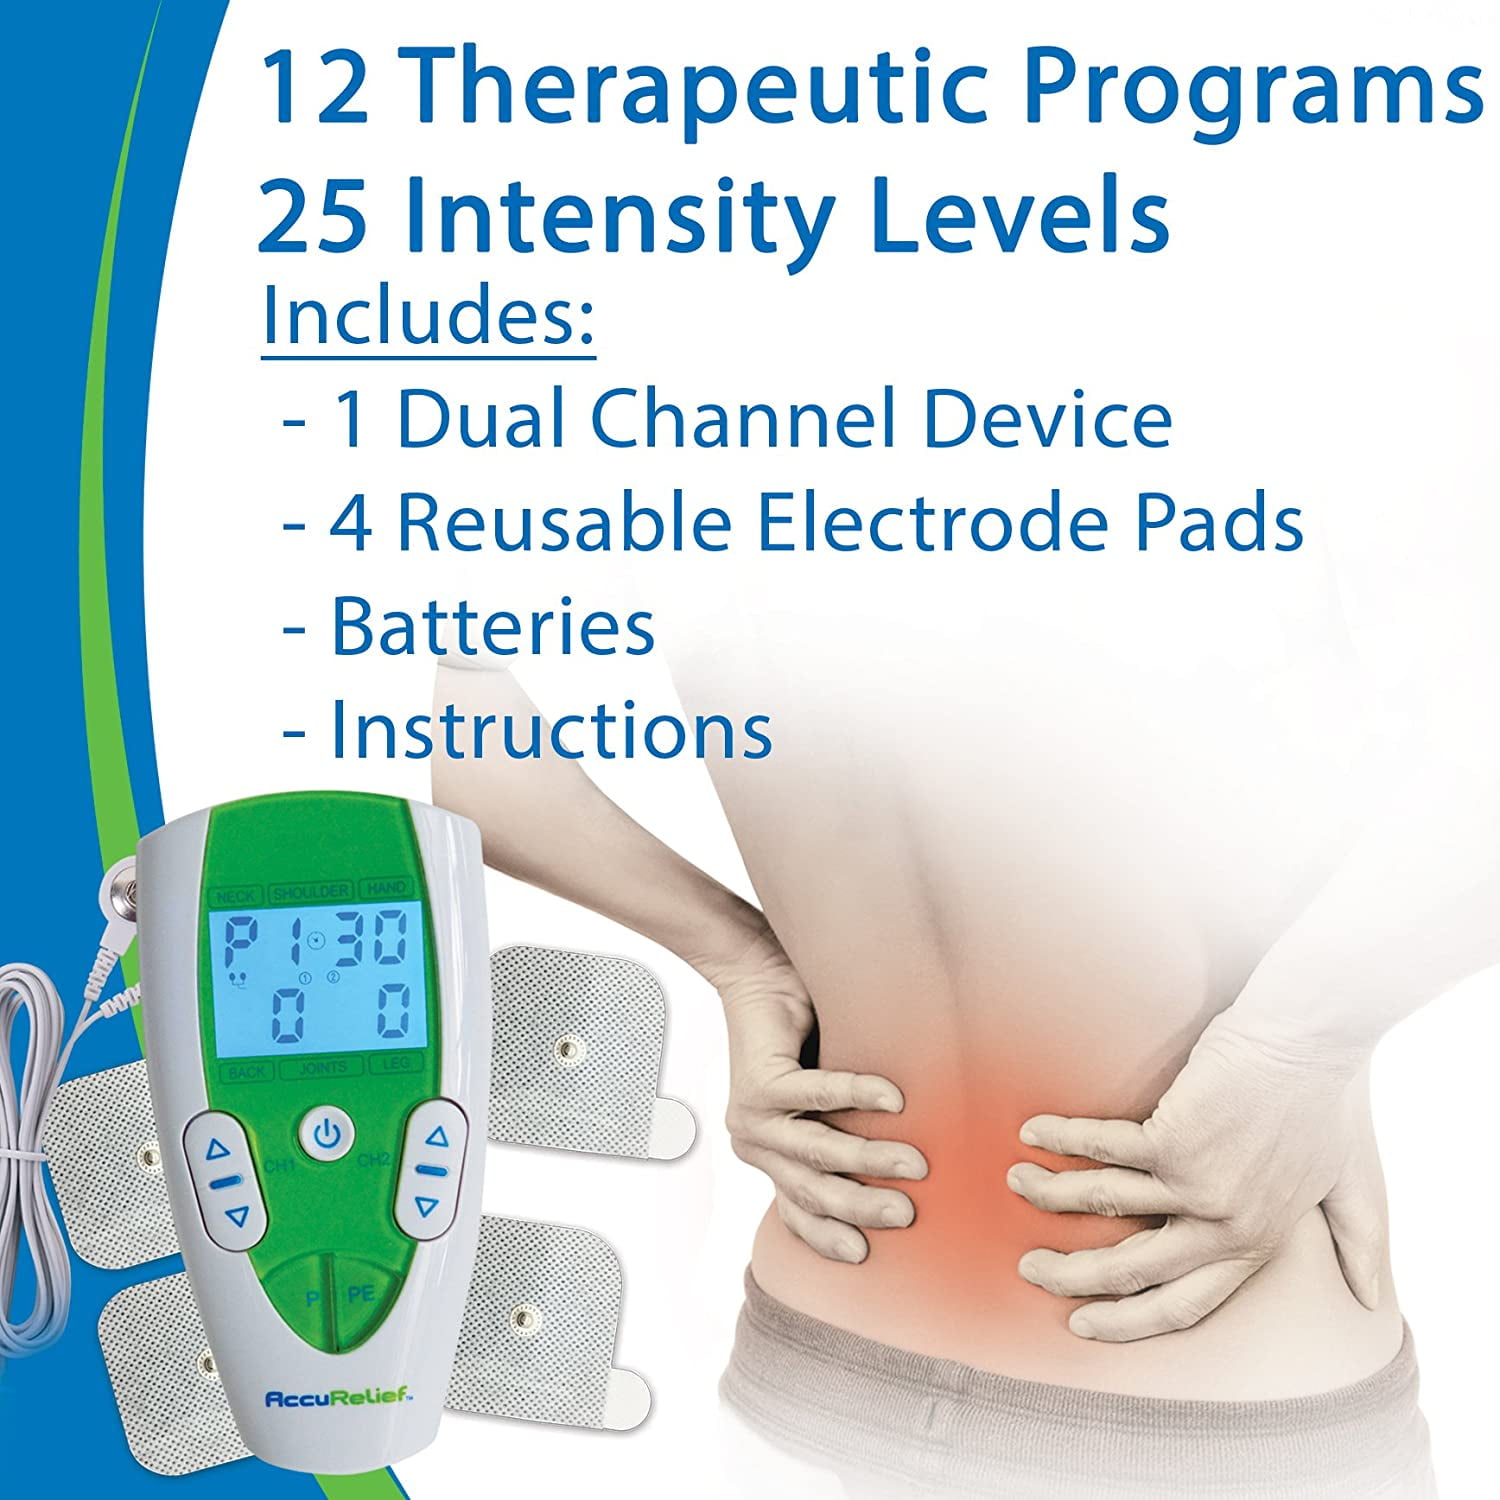 AccuRelief Electrotherapy Pain Relief Systems 